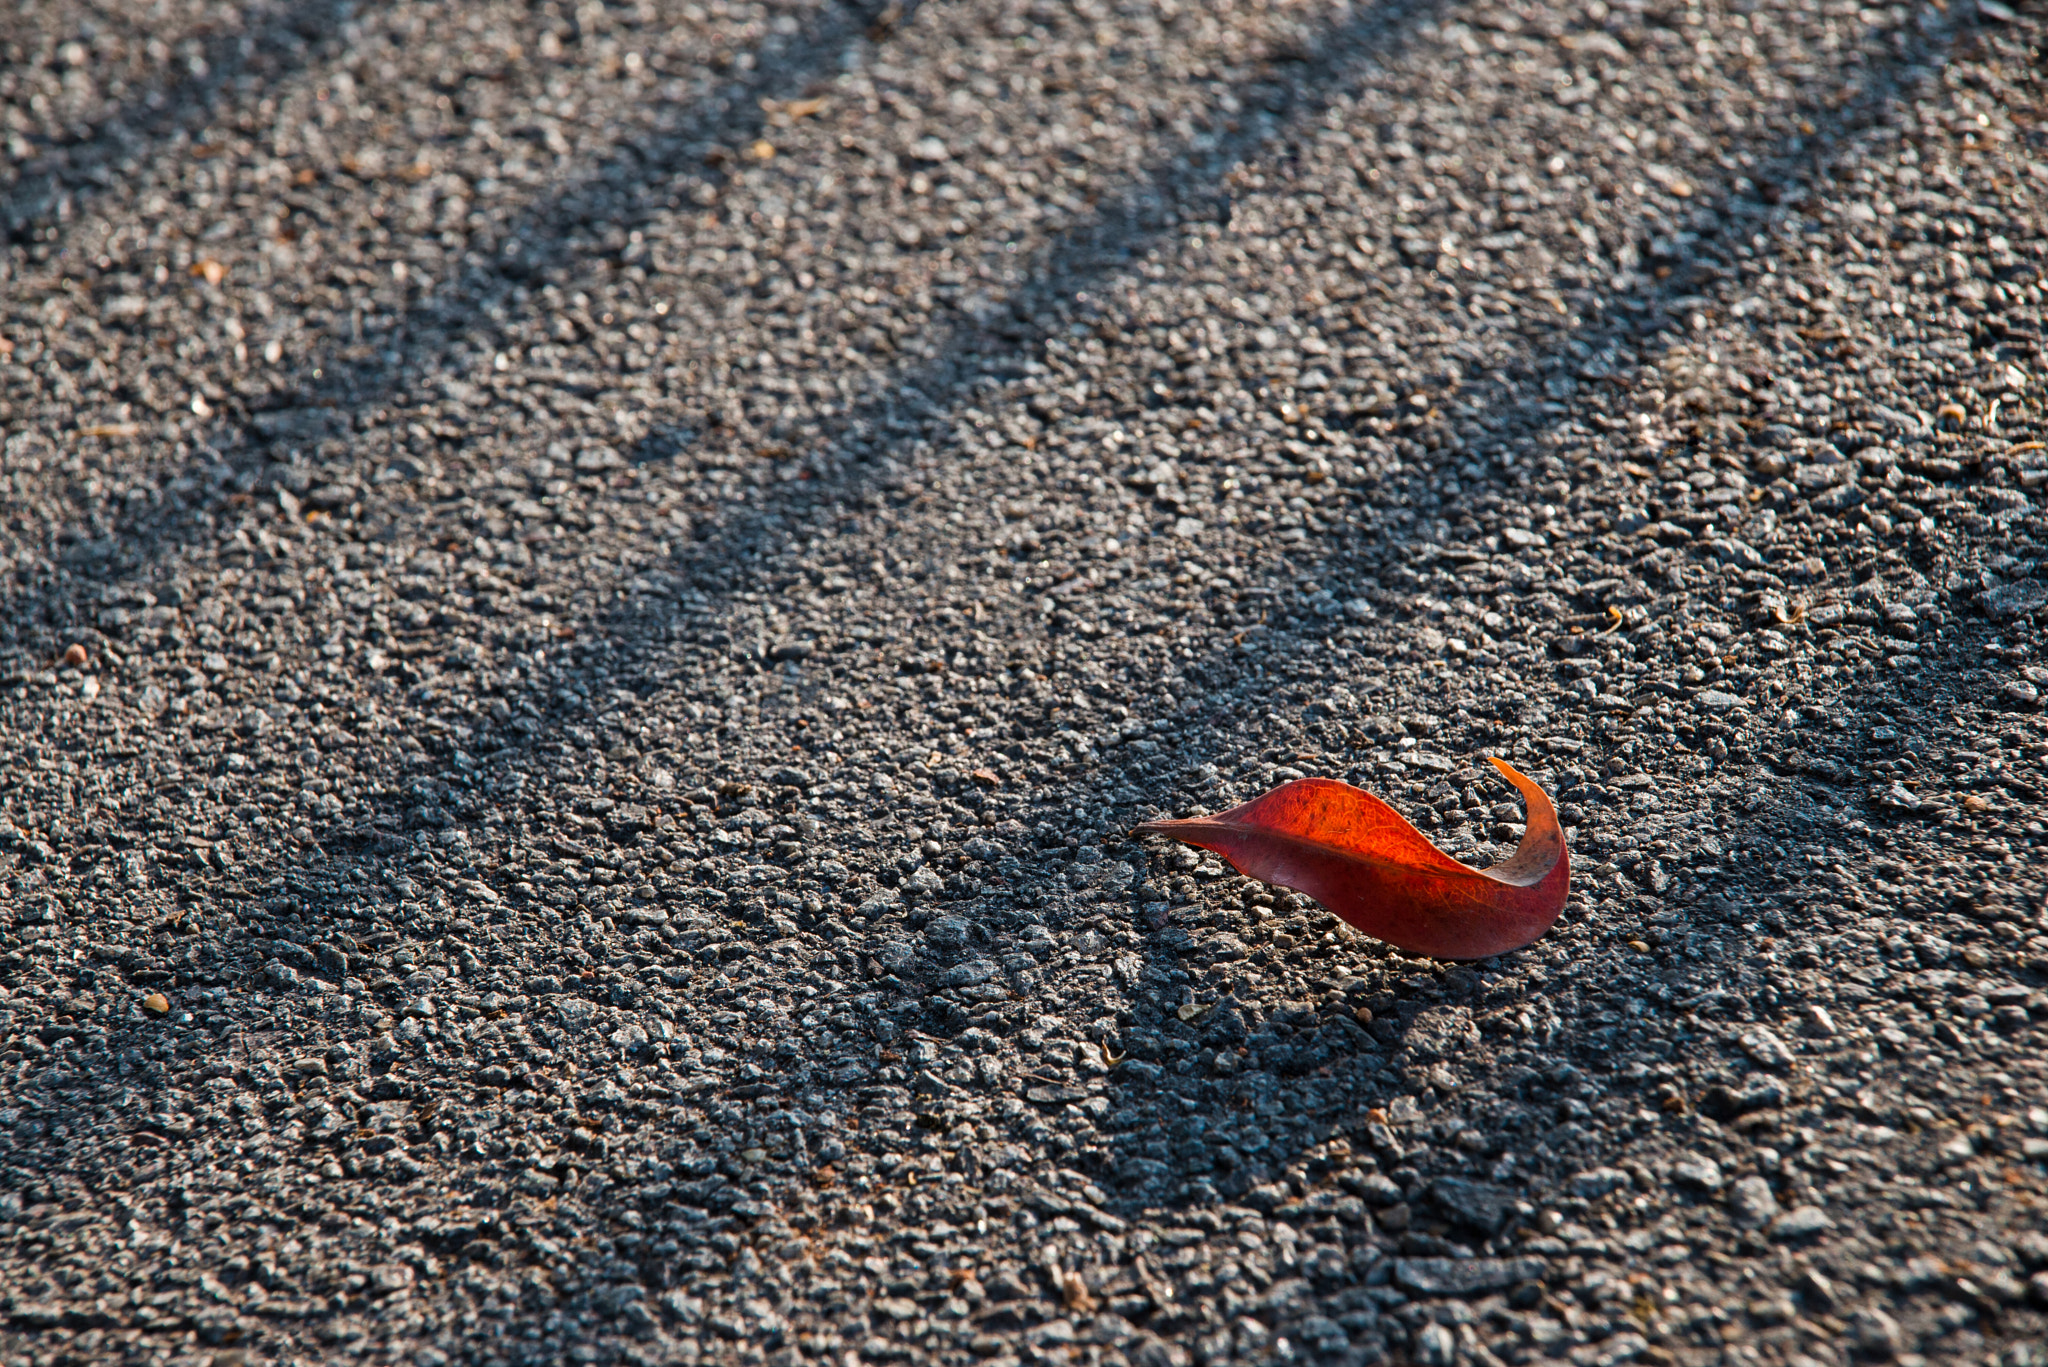 Nikon D600 sample photo. Red leaf fallen on pavement photography